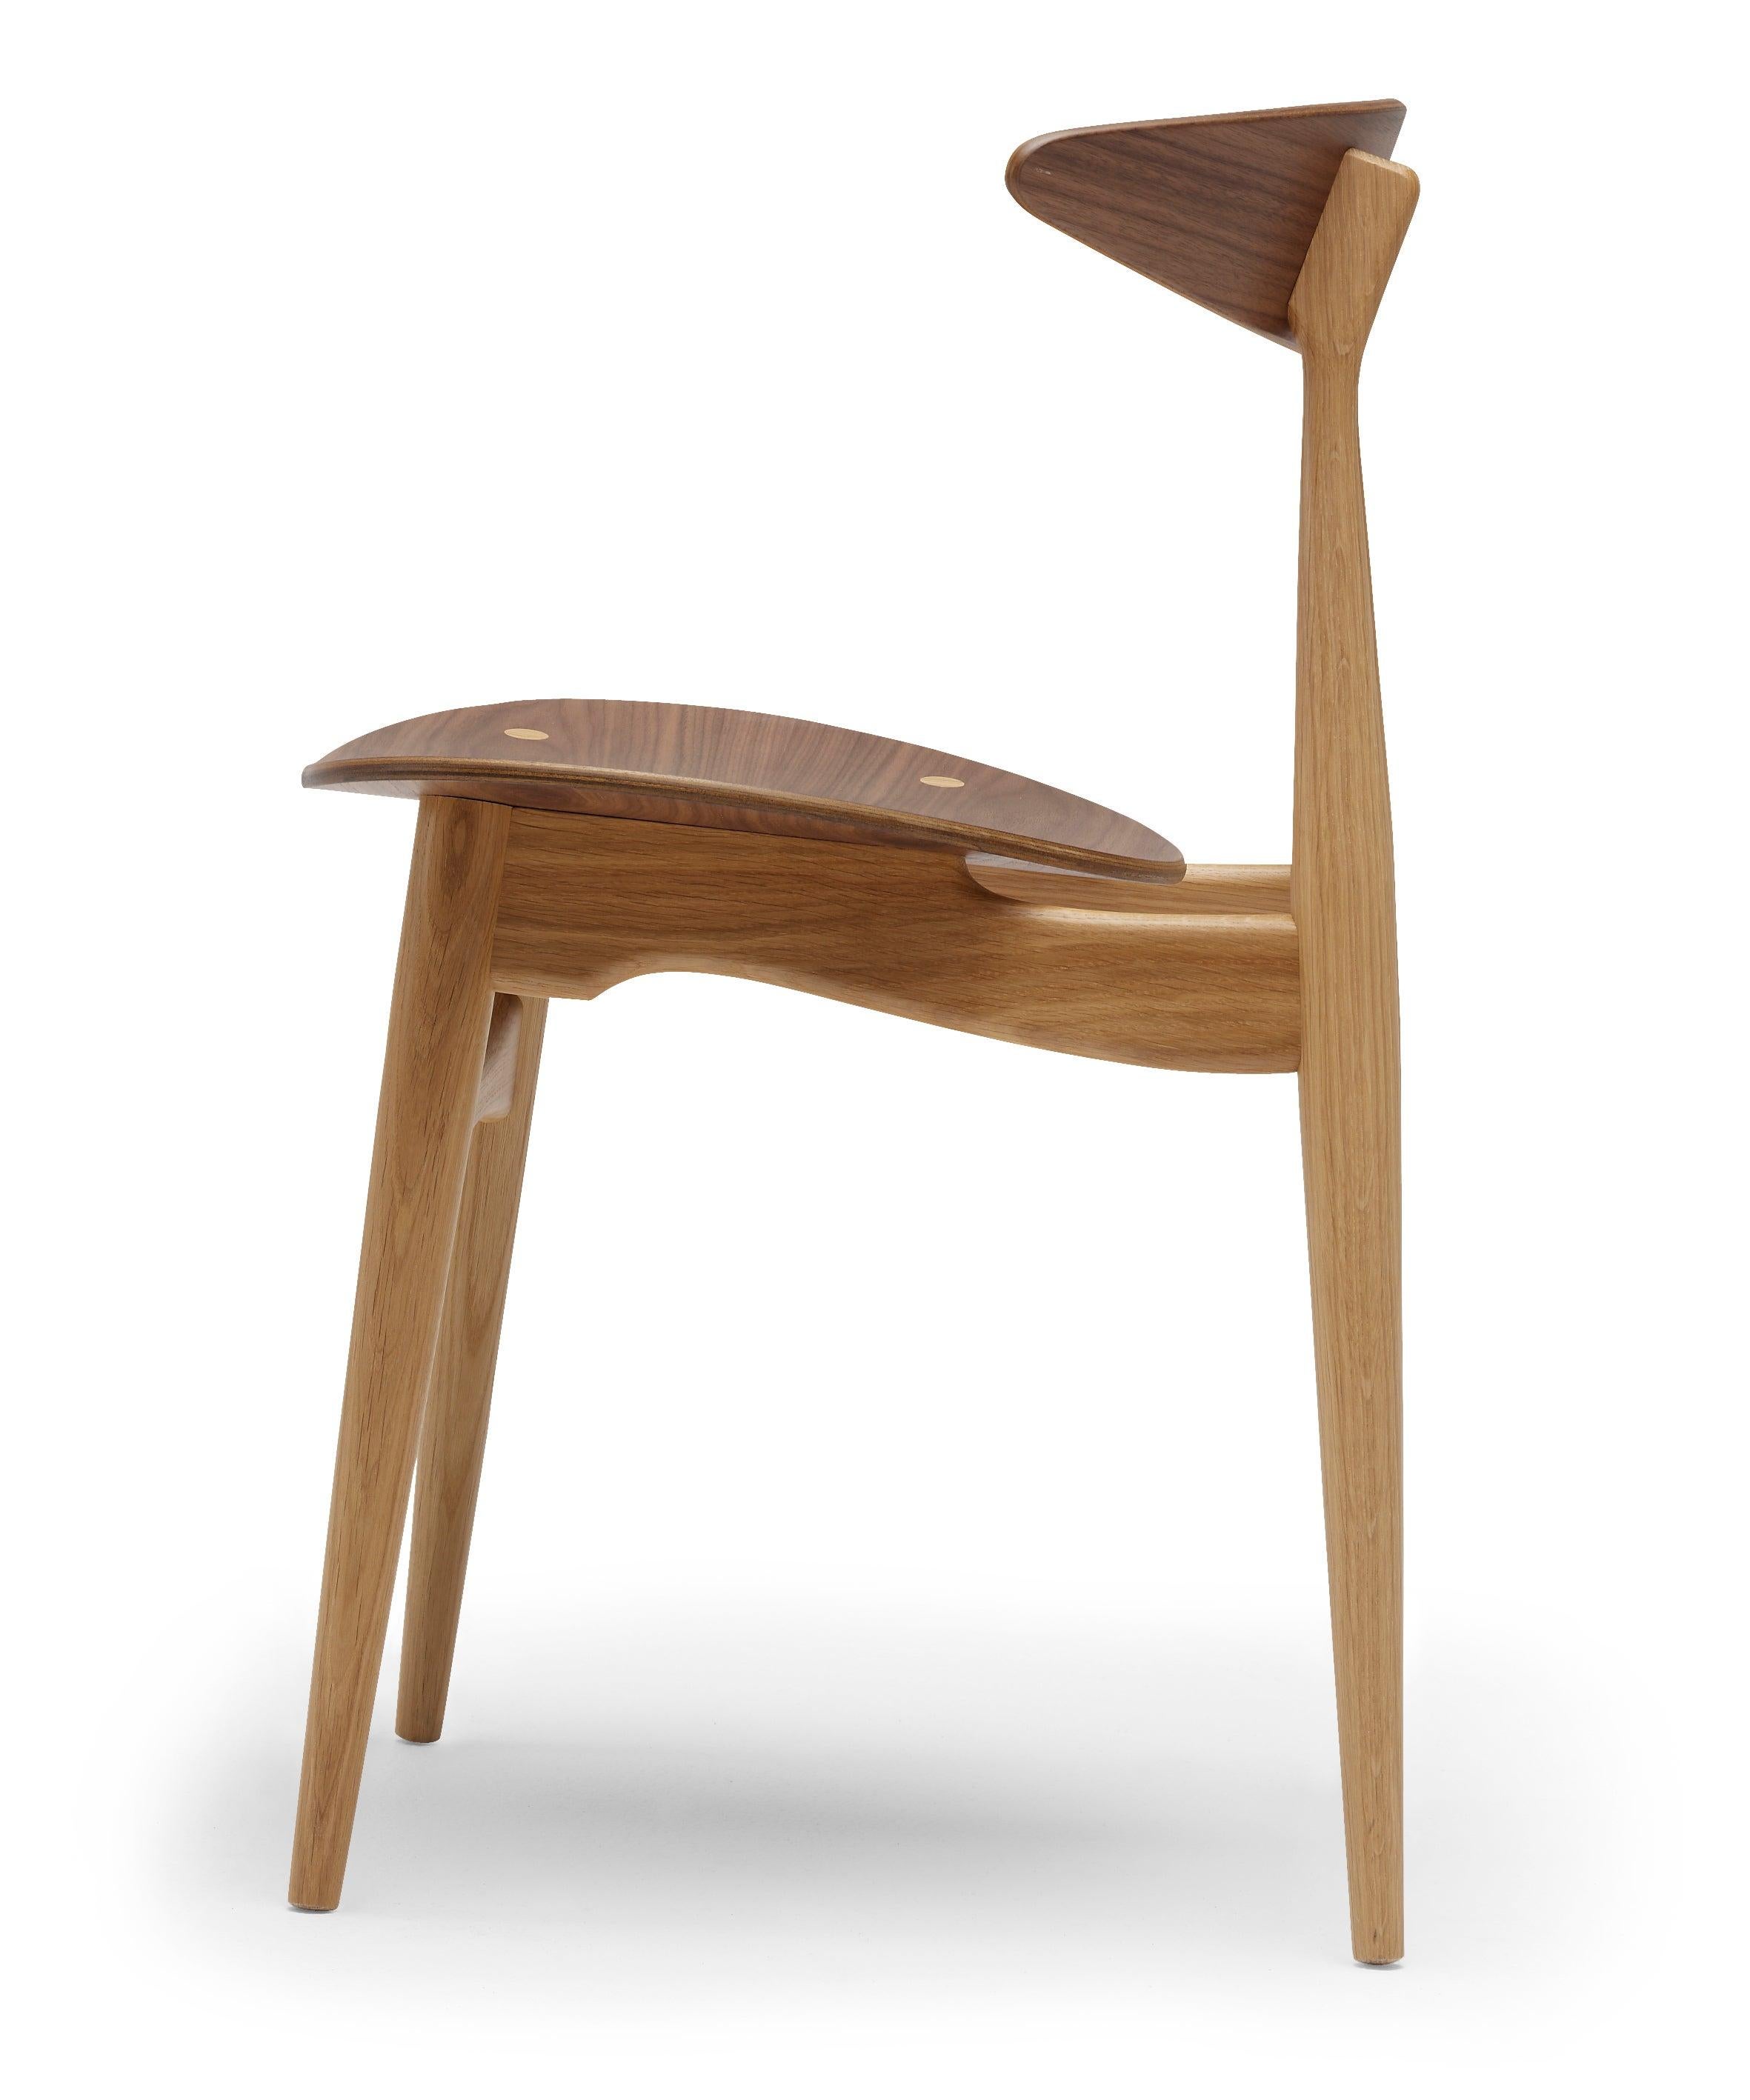 Designed for Carl Hansen & SÃ¸n in 1957, Hans J. Wegnerâ€™s CH33T chair remained in production for ten consecutive years. Carl Hansen & SÃ¸n reintroduced the design in 2012, adding colors from Wegnerâ€™s own working palette to the original variant.